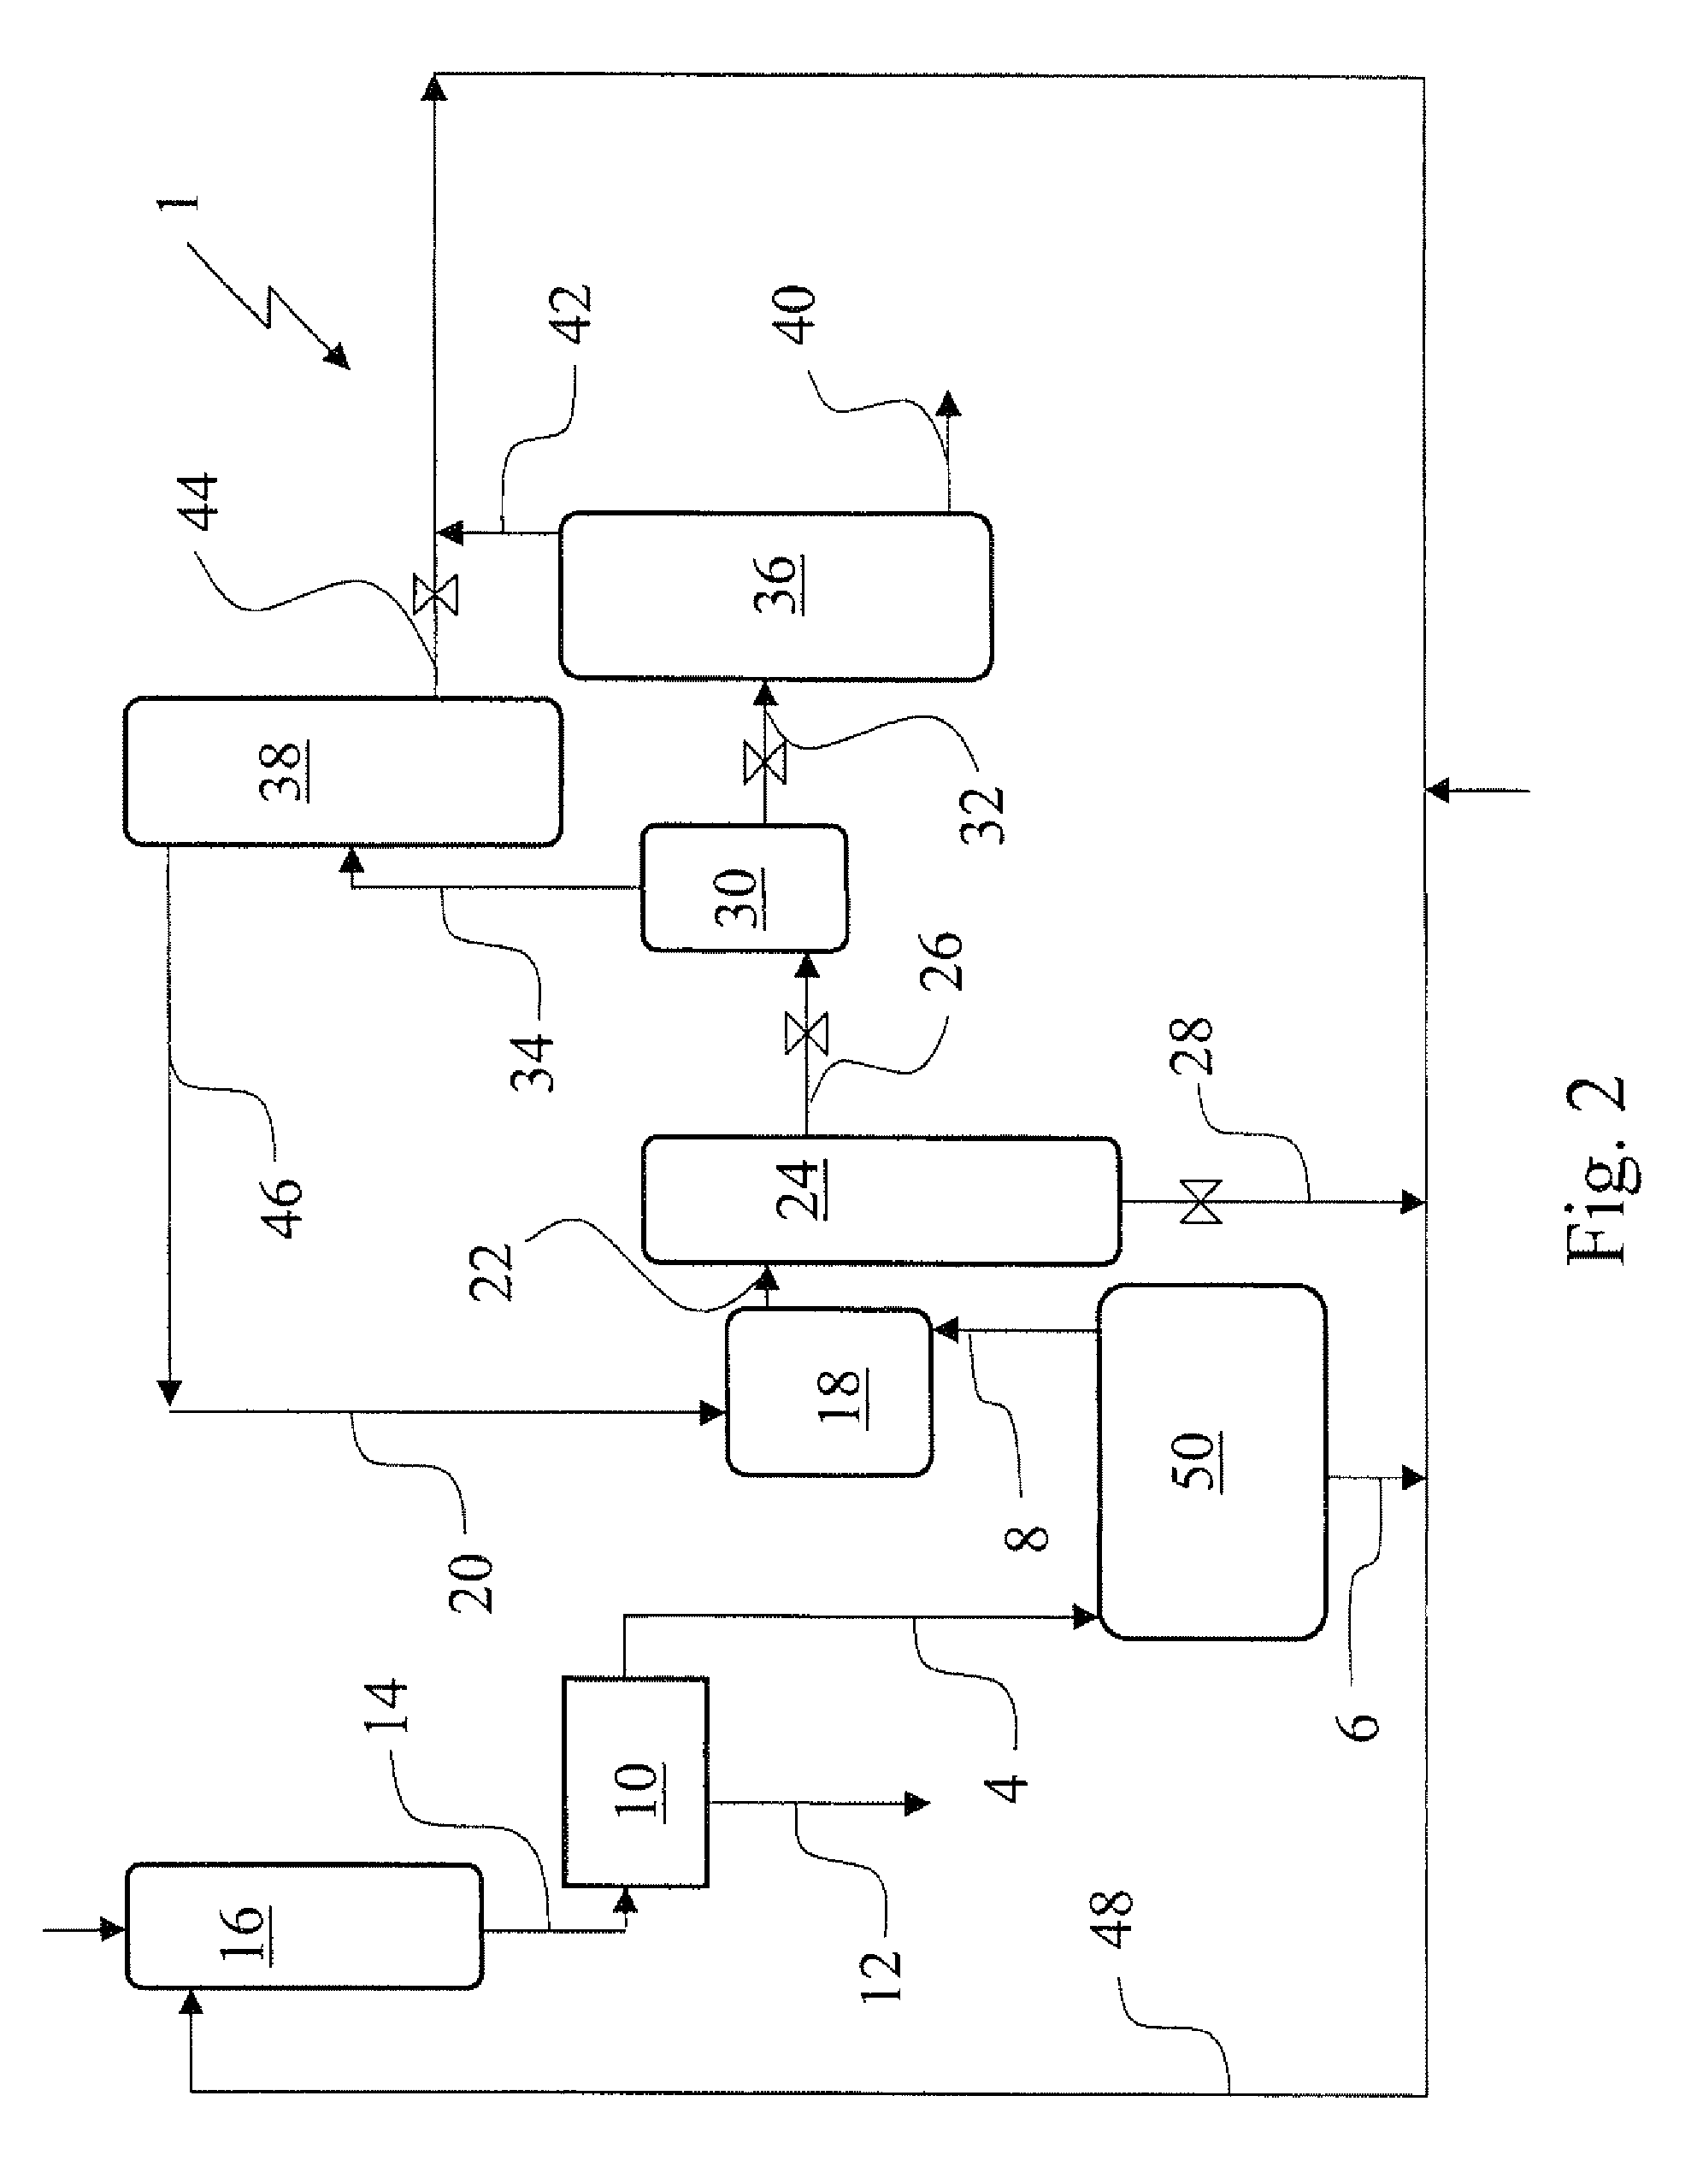 Process for isolation of an organic amine